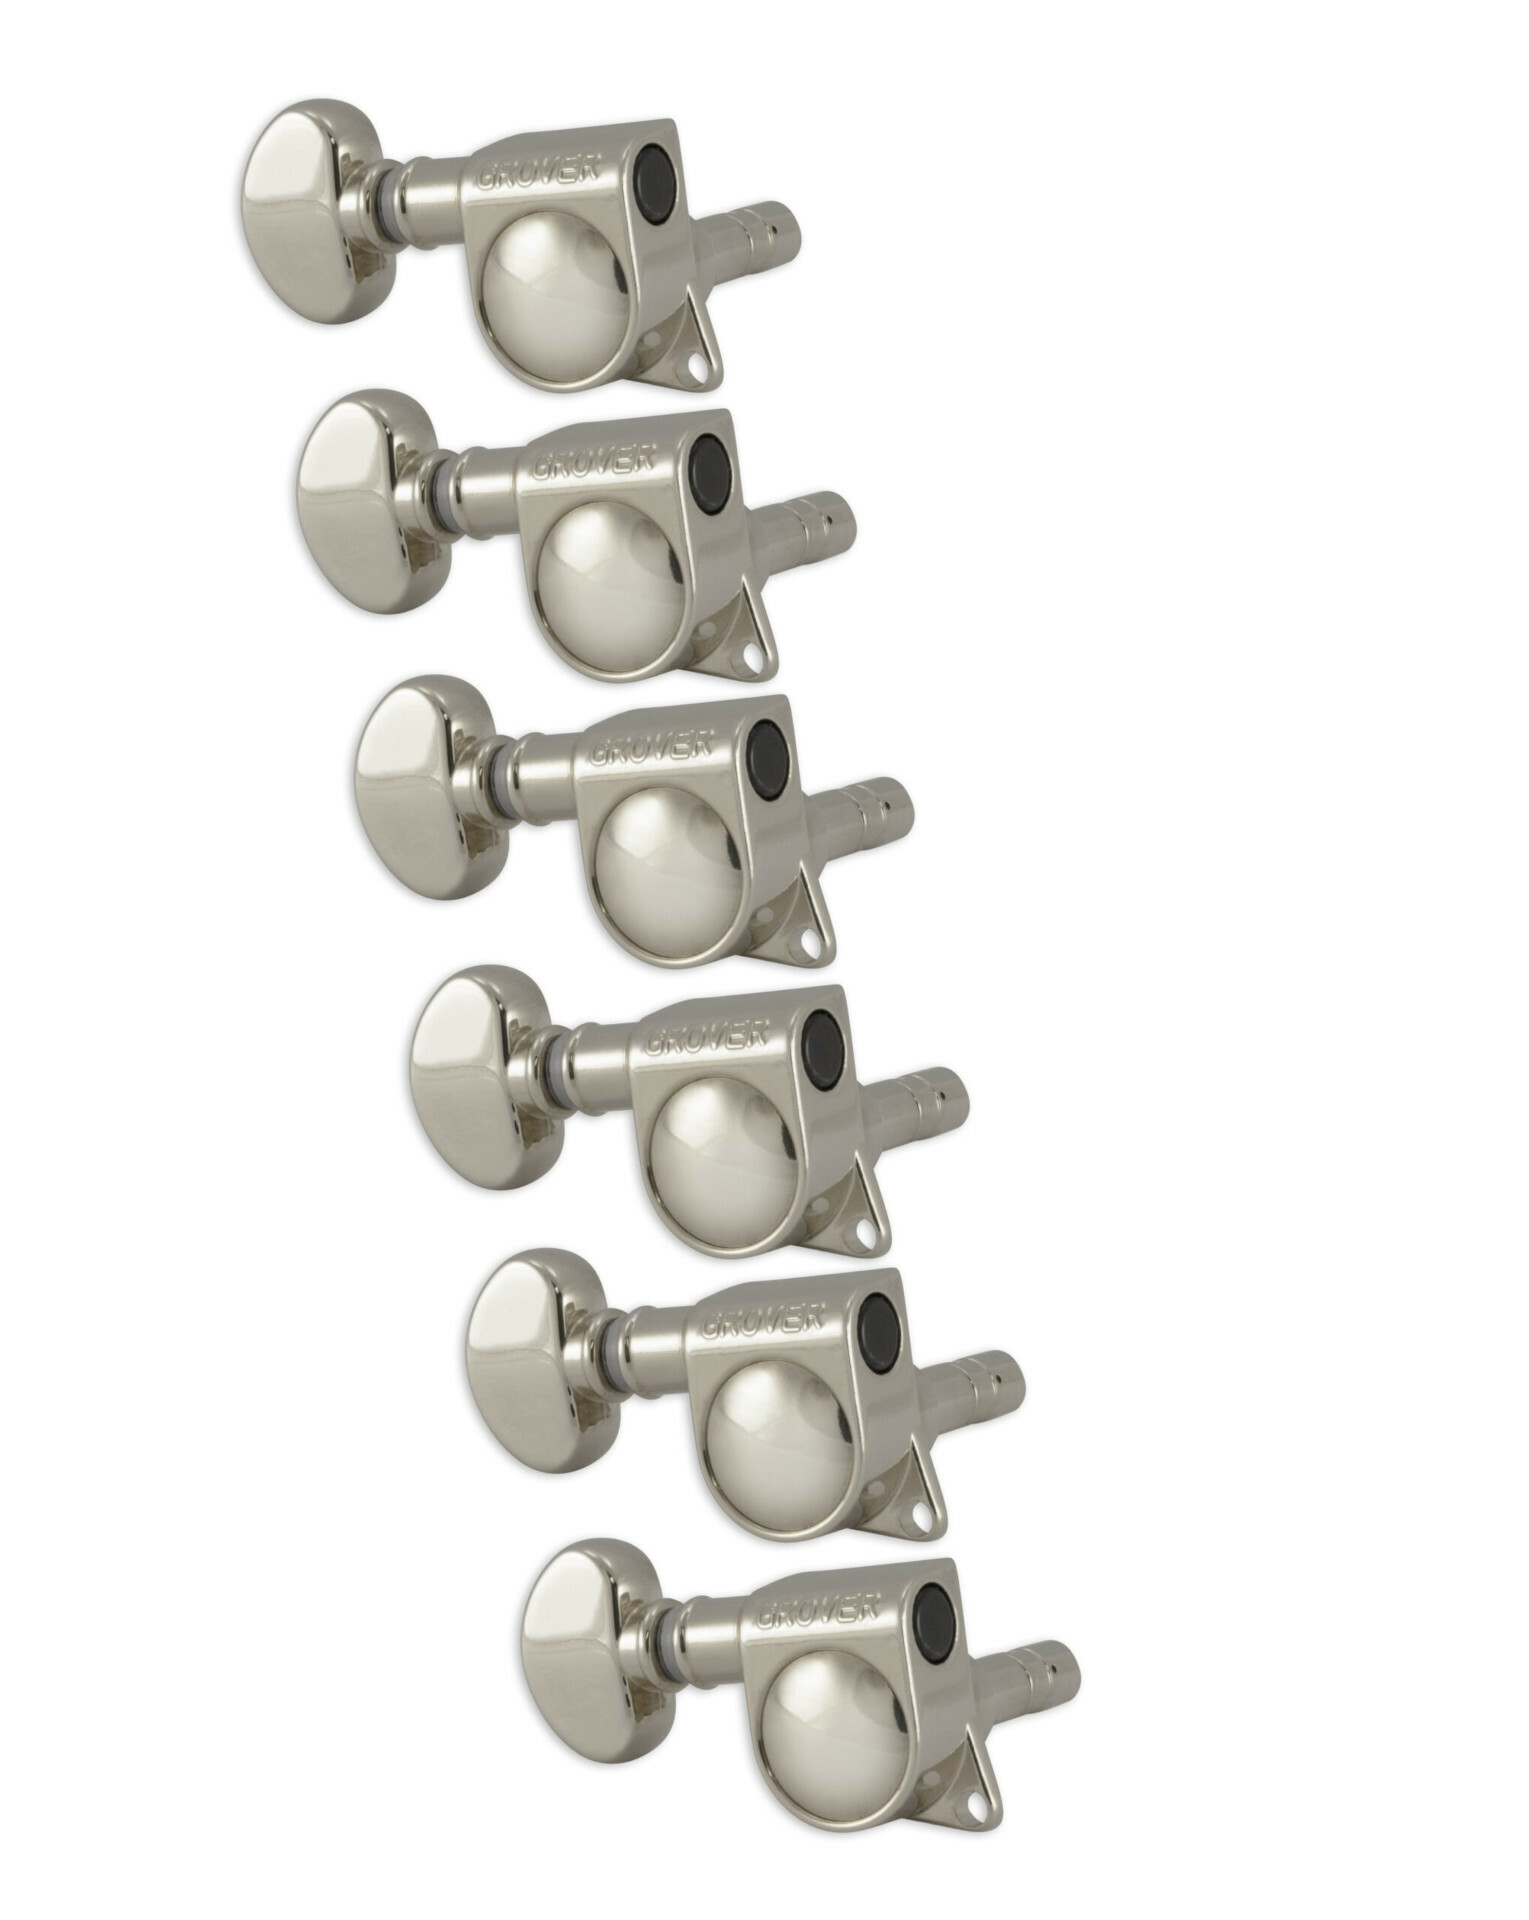 Grover 406NL6 Mini Locking Rotomatics with Round Button - Guitar Machine Heads, 6-in-Line, Lefthand, Treble Side (Right) - Nickel